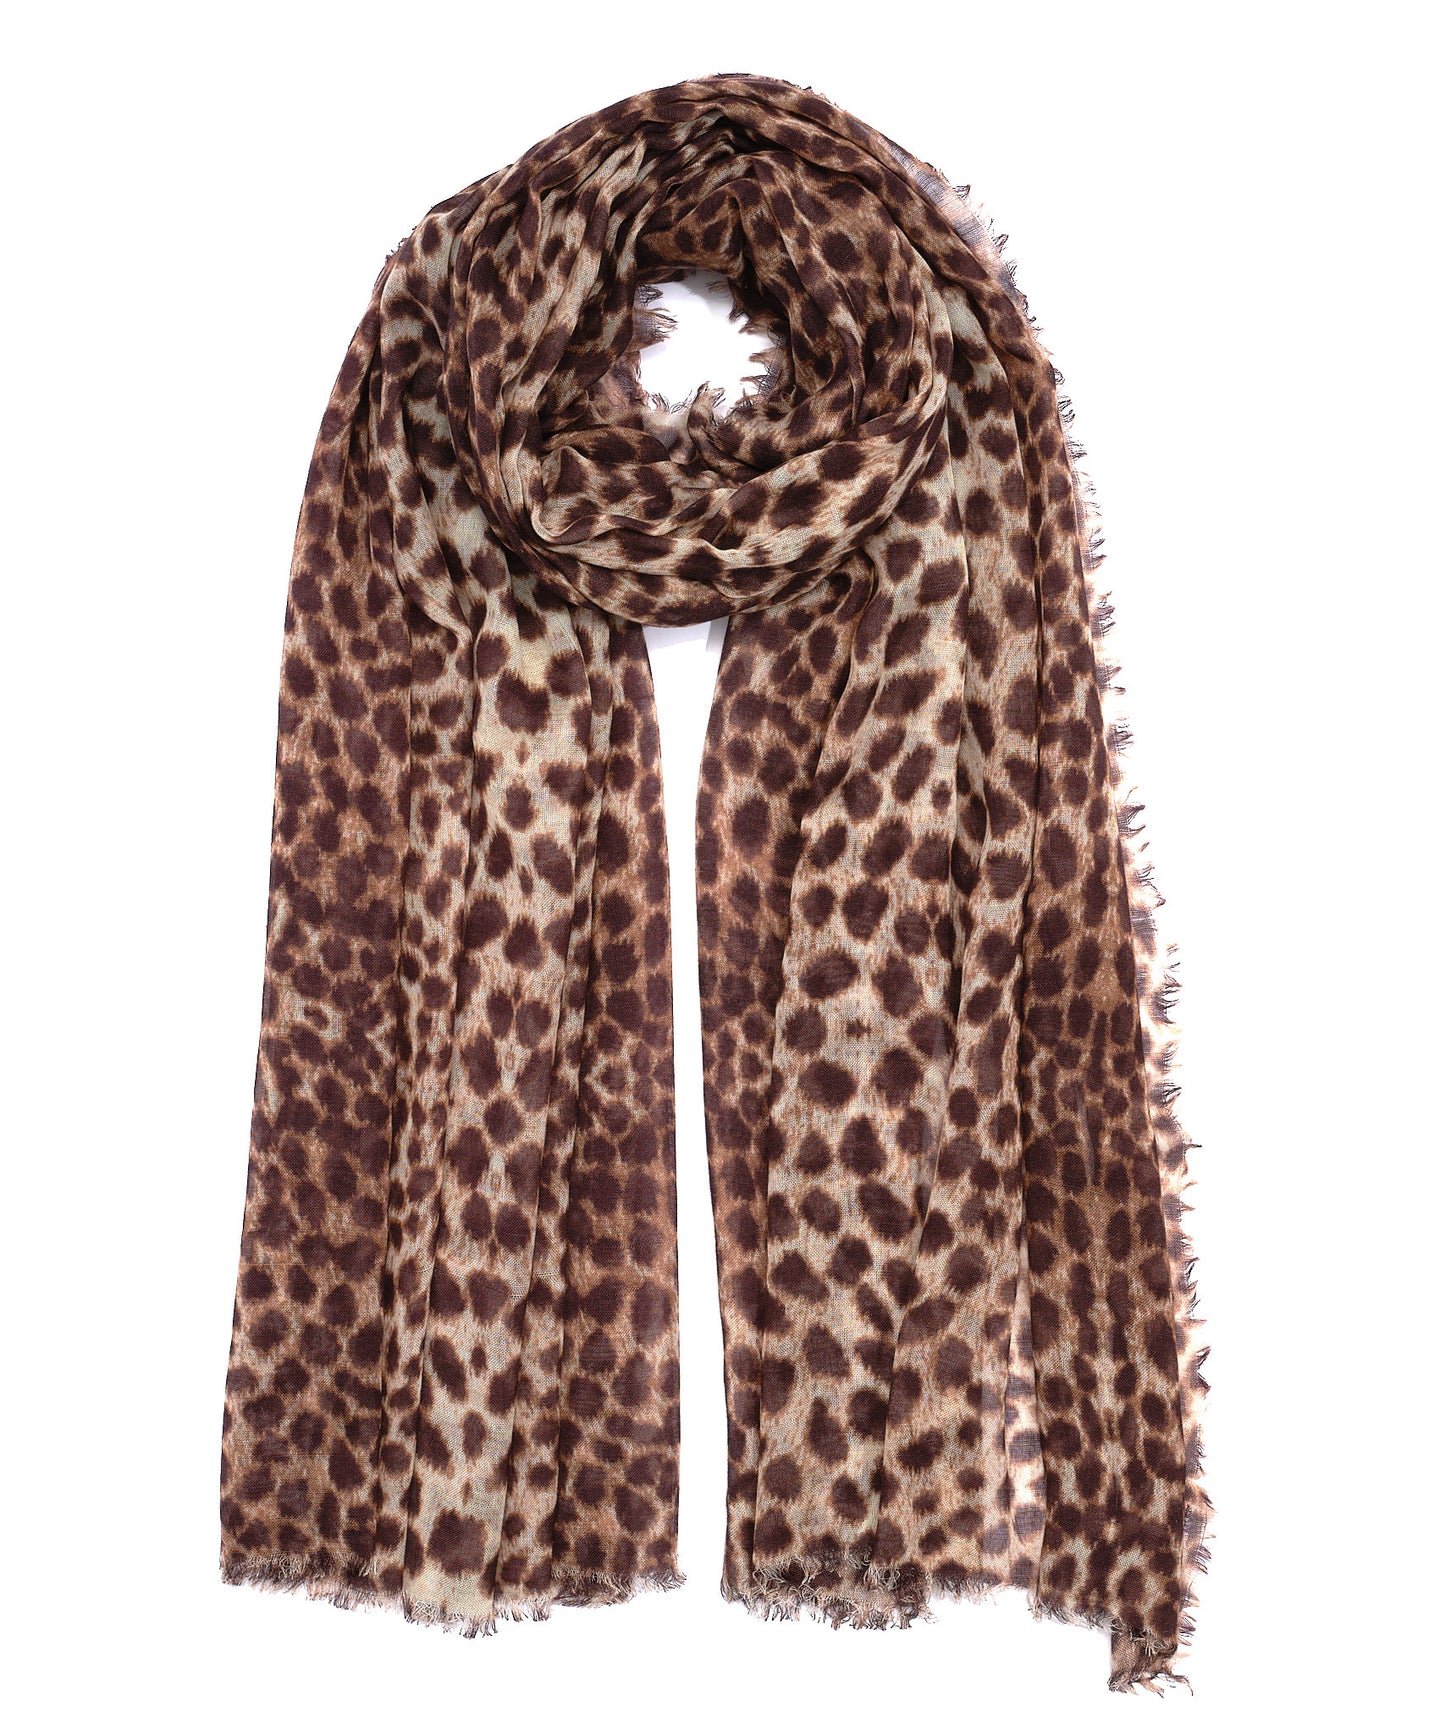 Leopard Wrap in color Natural